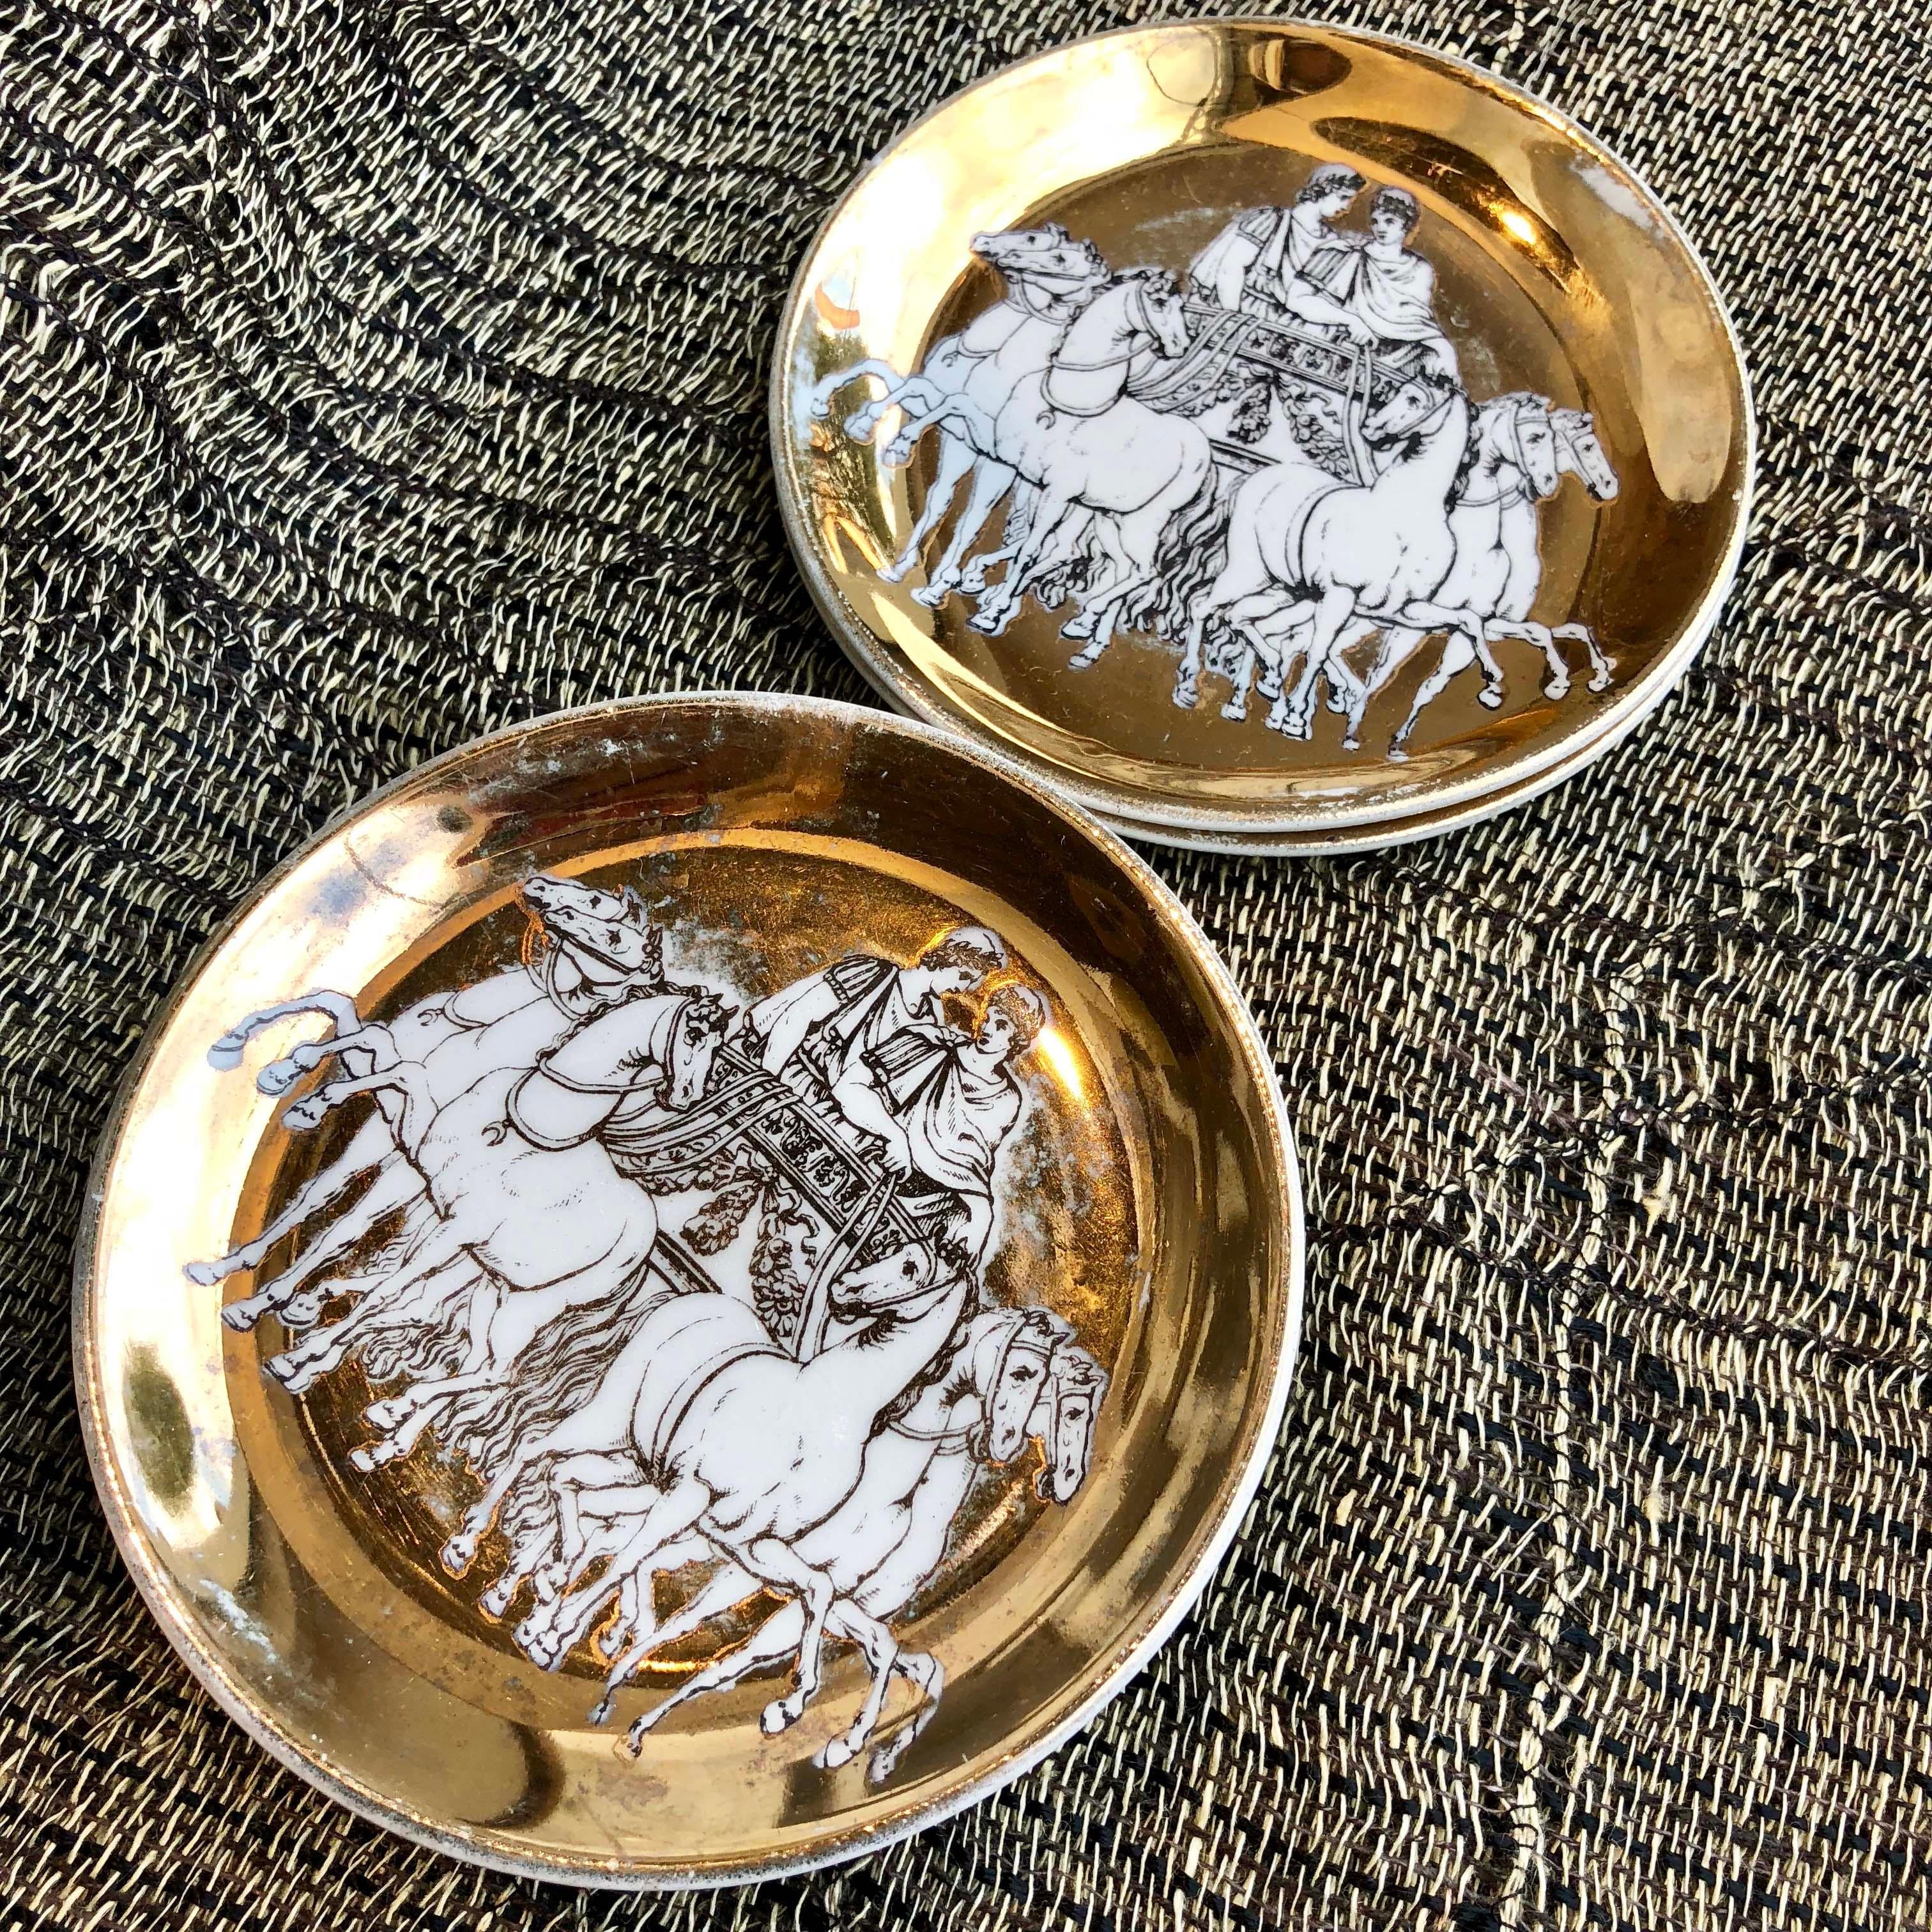 Highly collectable Fornasetti coasters, featuring gold leaf design with hand drawings of horses and chariot. Sold as a set of 6.

Measures: 10 Diameter cm each.

Good vintage condition considering the age.